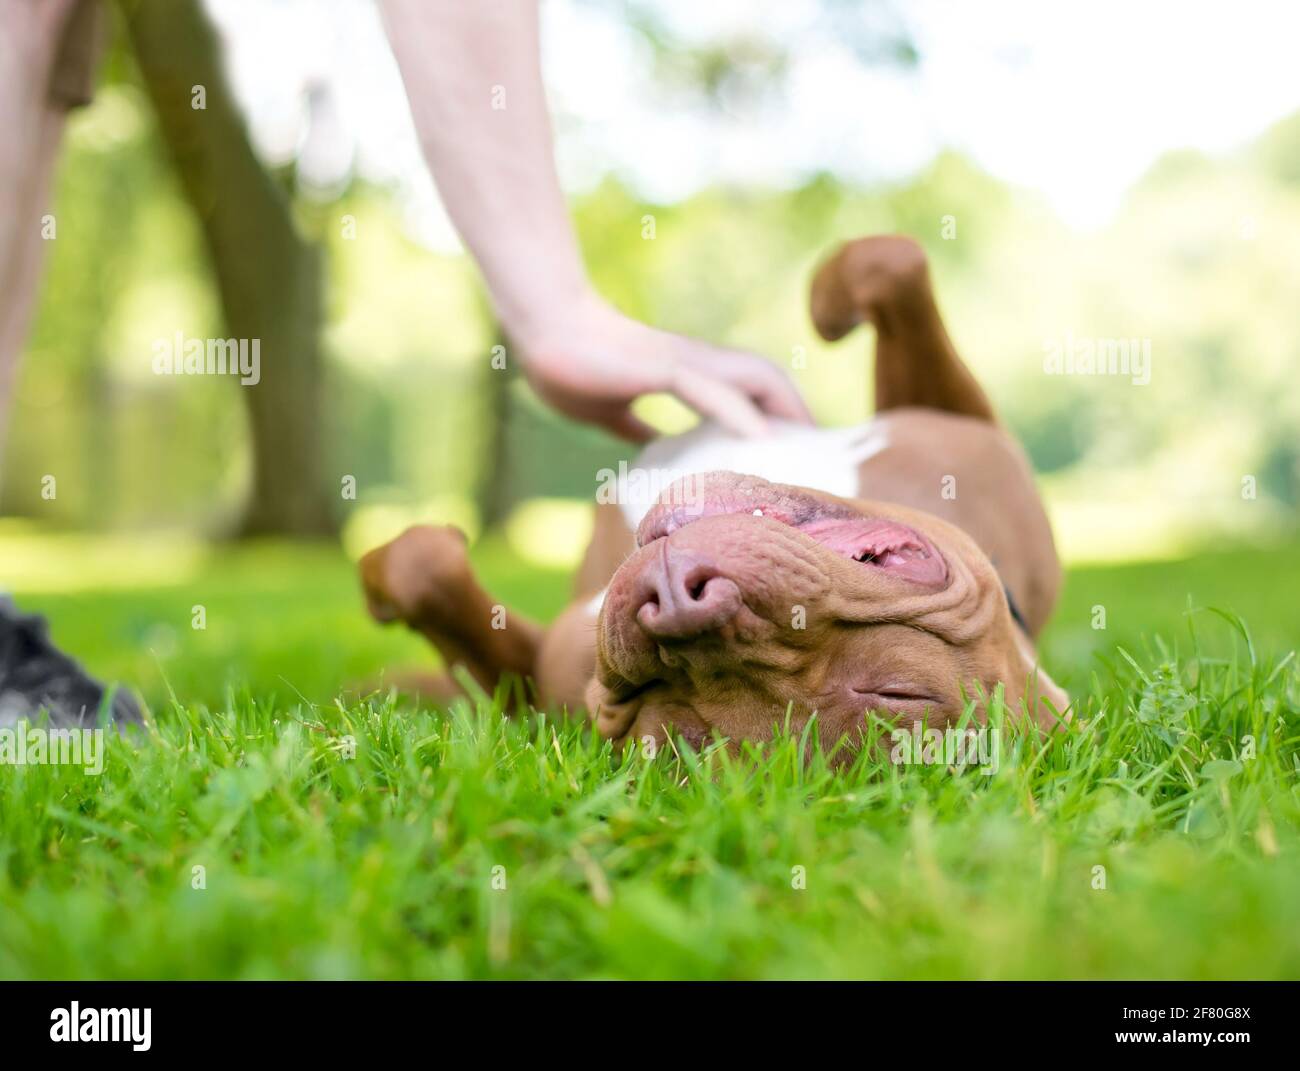 A red and white Pit Bull Terrier mixed breed dog lying upside down in the grass as a person rubs its belly Stock Photo